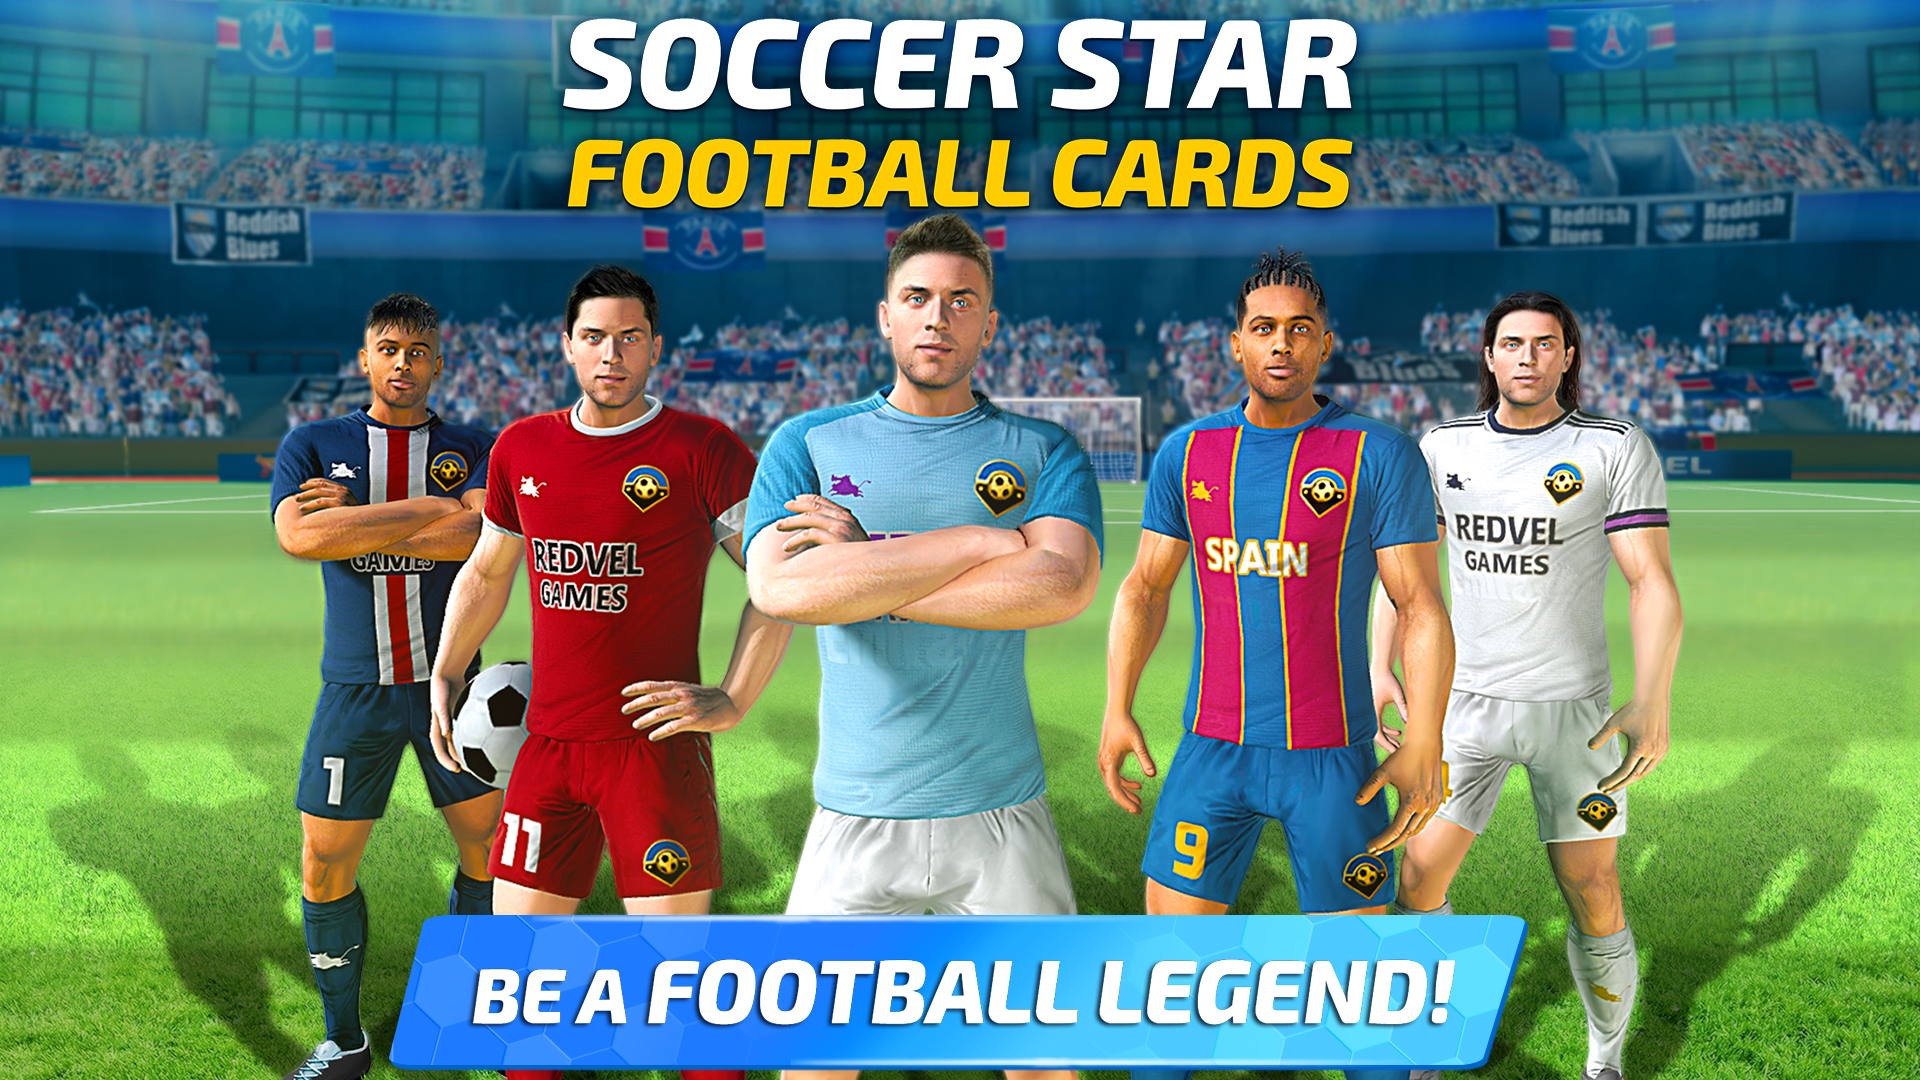 Play Soccer Super Star Online for Free on PC & Mobile